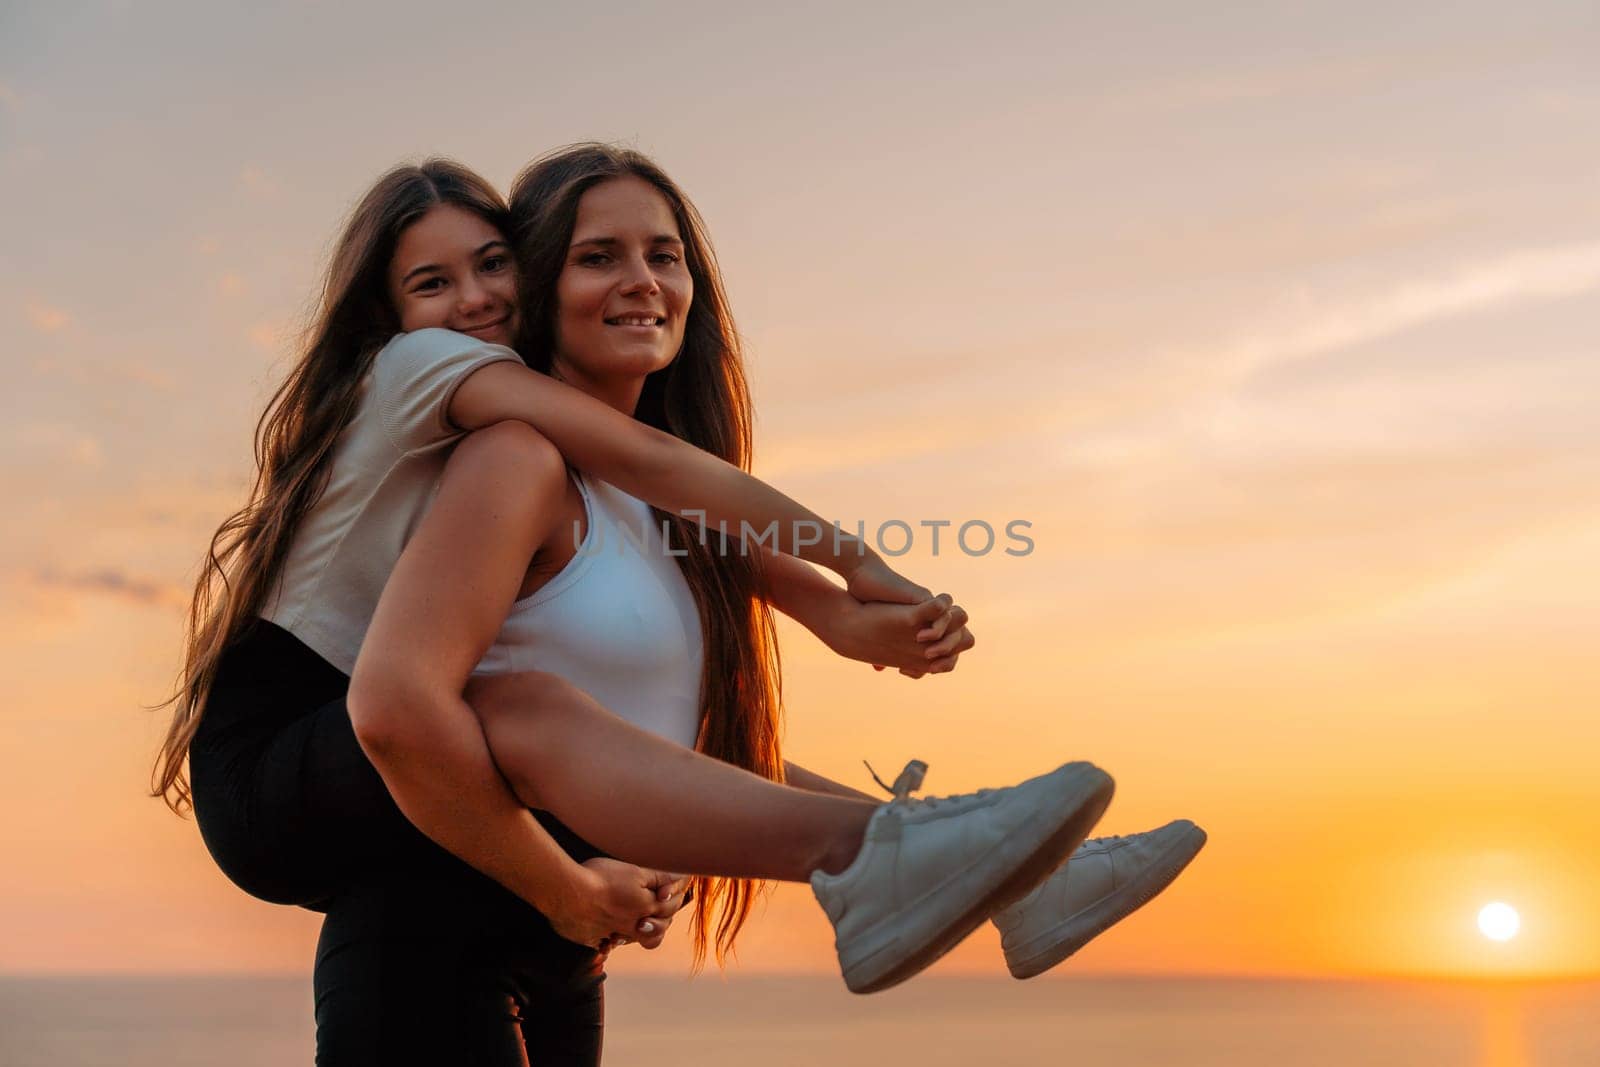 Mother carrying daughter on her back as they walk together, wearing a white shirt, and both are enjoying their time together, takes place during a sunset, adding a warm and serene atmosphere to the image